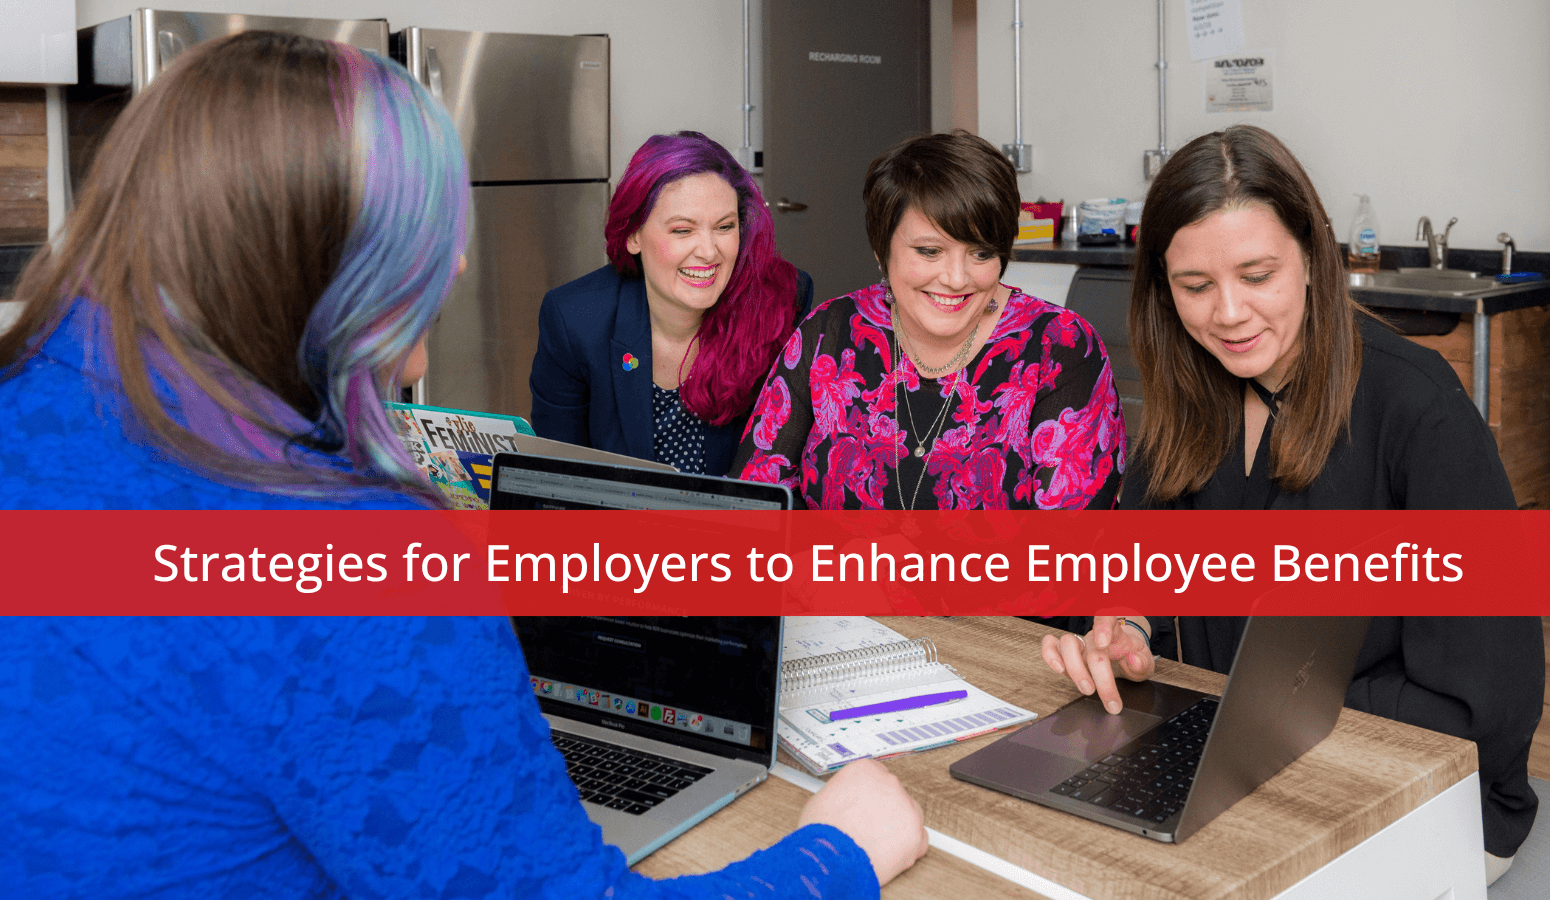 Featured image for “Strategies for Employers to Enhance Employee Benefits”